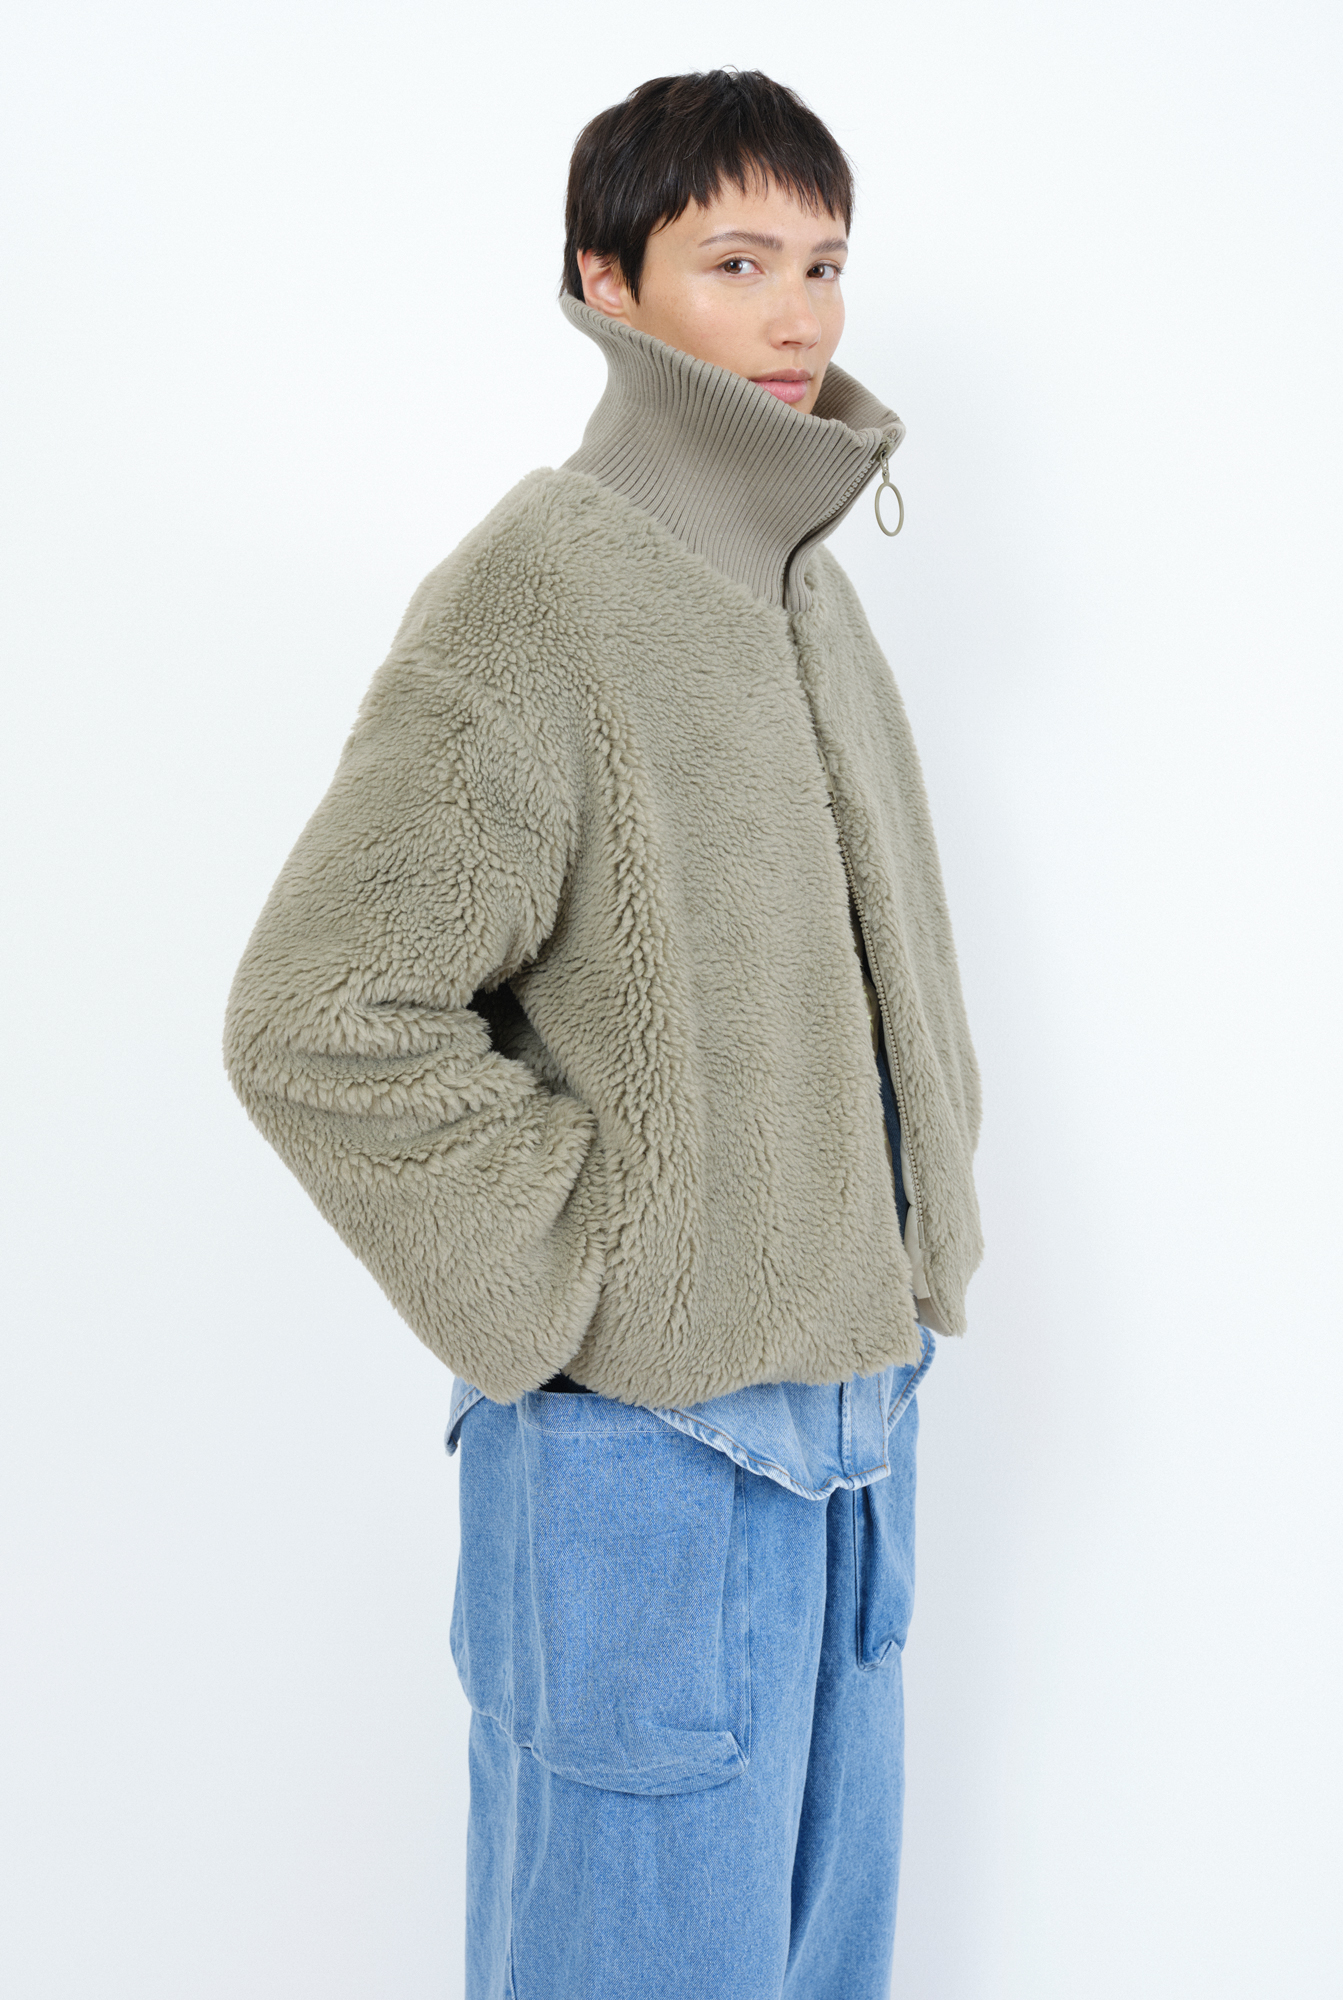 Korsika Teddy Bomber Pale Olive from Shop Like You Give a Damn